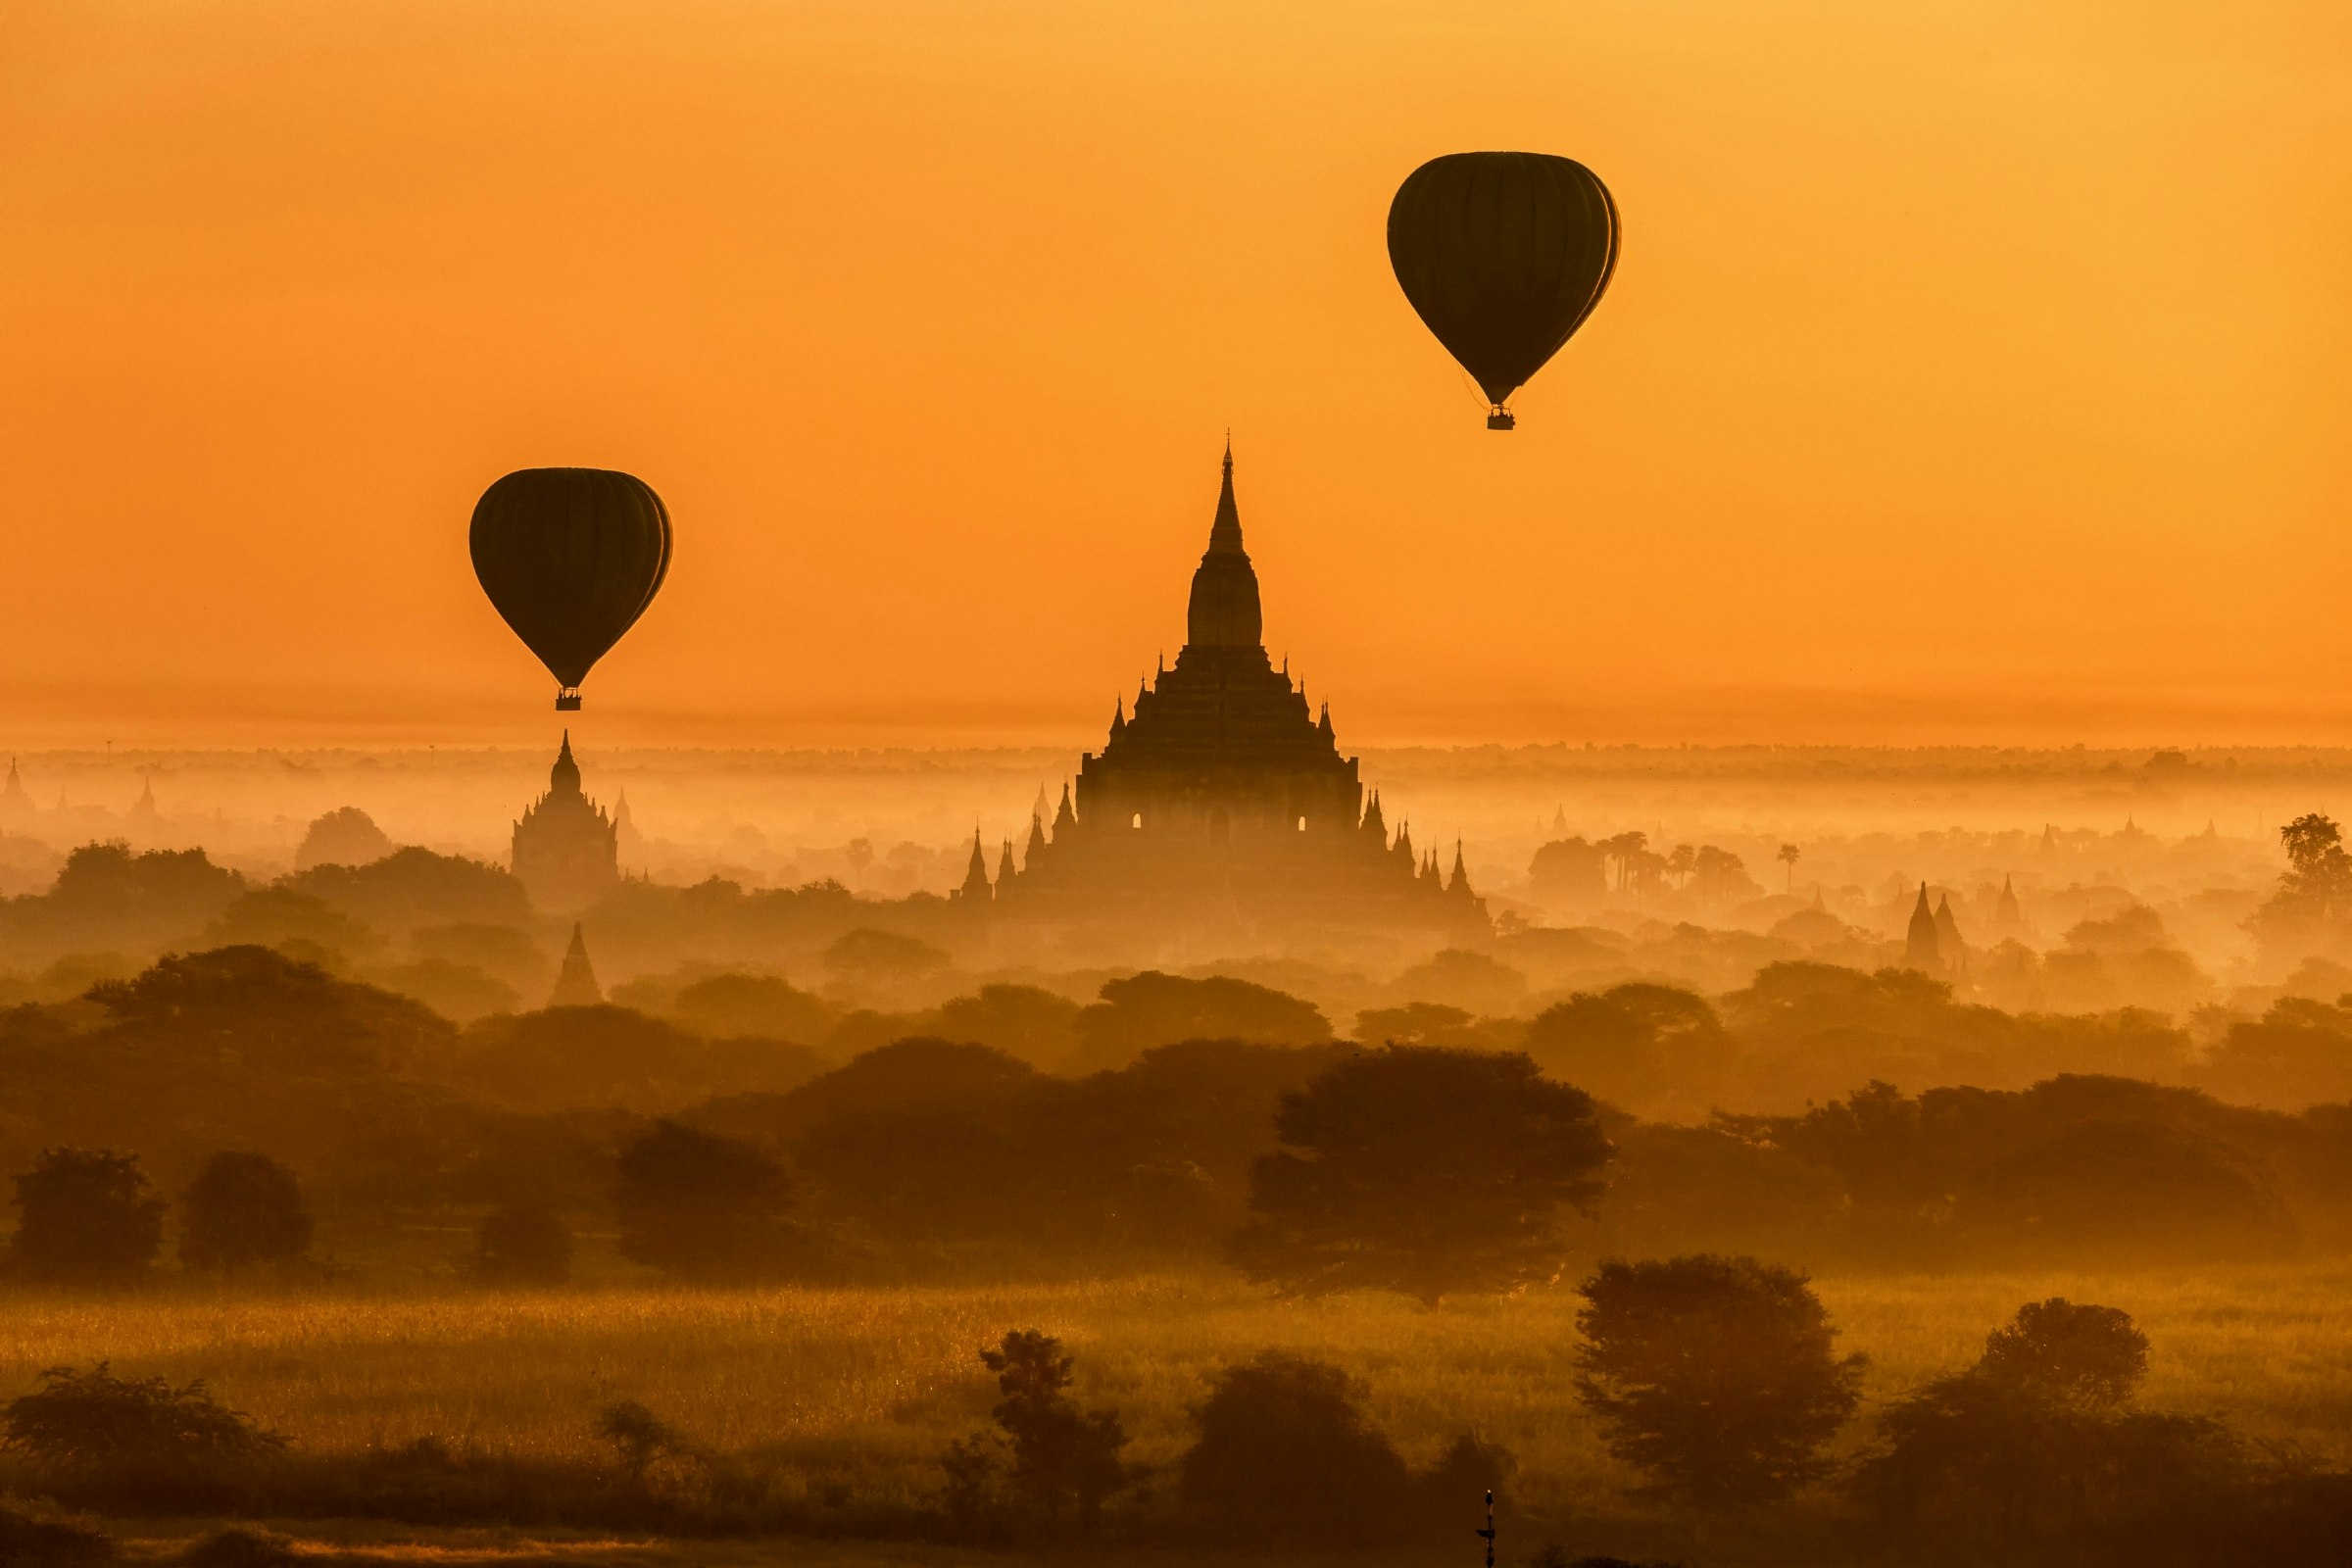 A view overlooking the temples of Bagan at sunset. The ancient temples, surrounded by field and greenery, are silhouetted against the sunset. A couple of hot air balloons also fly overhead, adding to the scenic view.